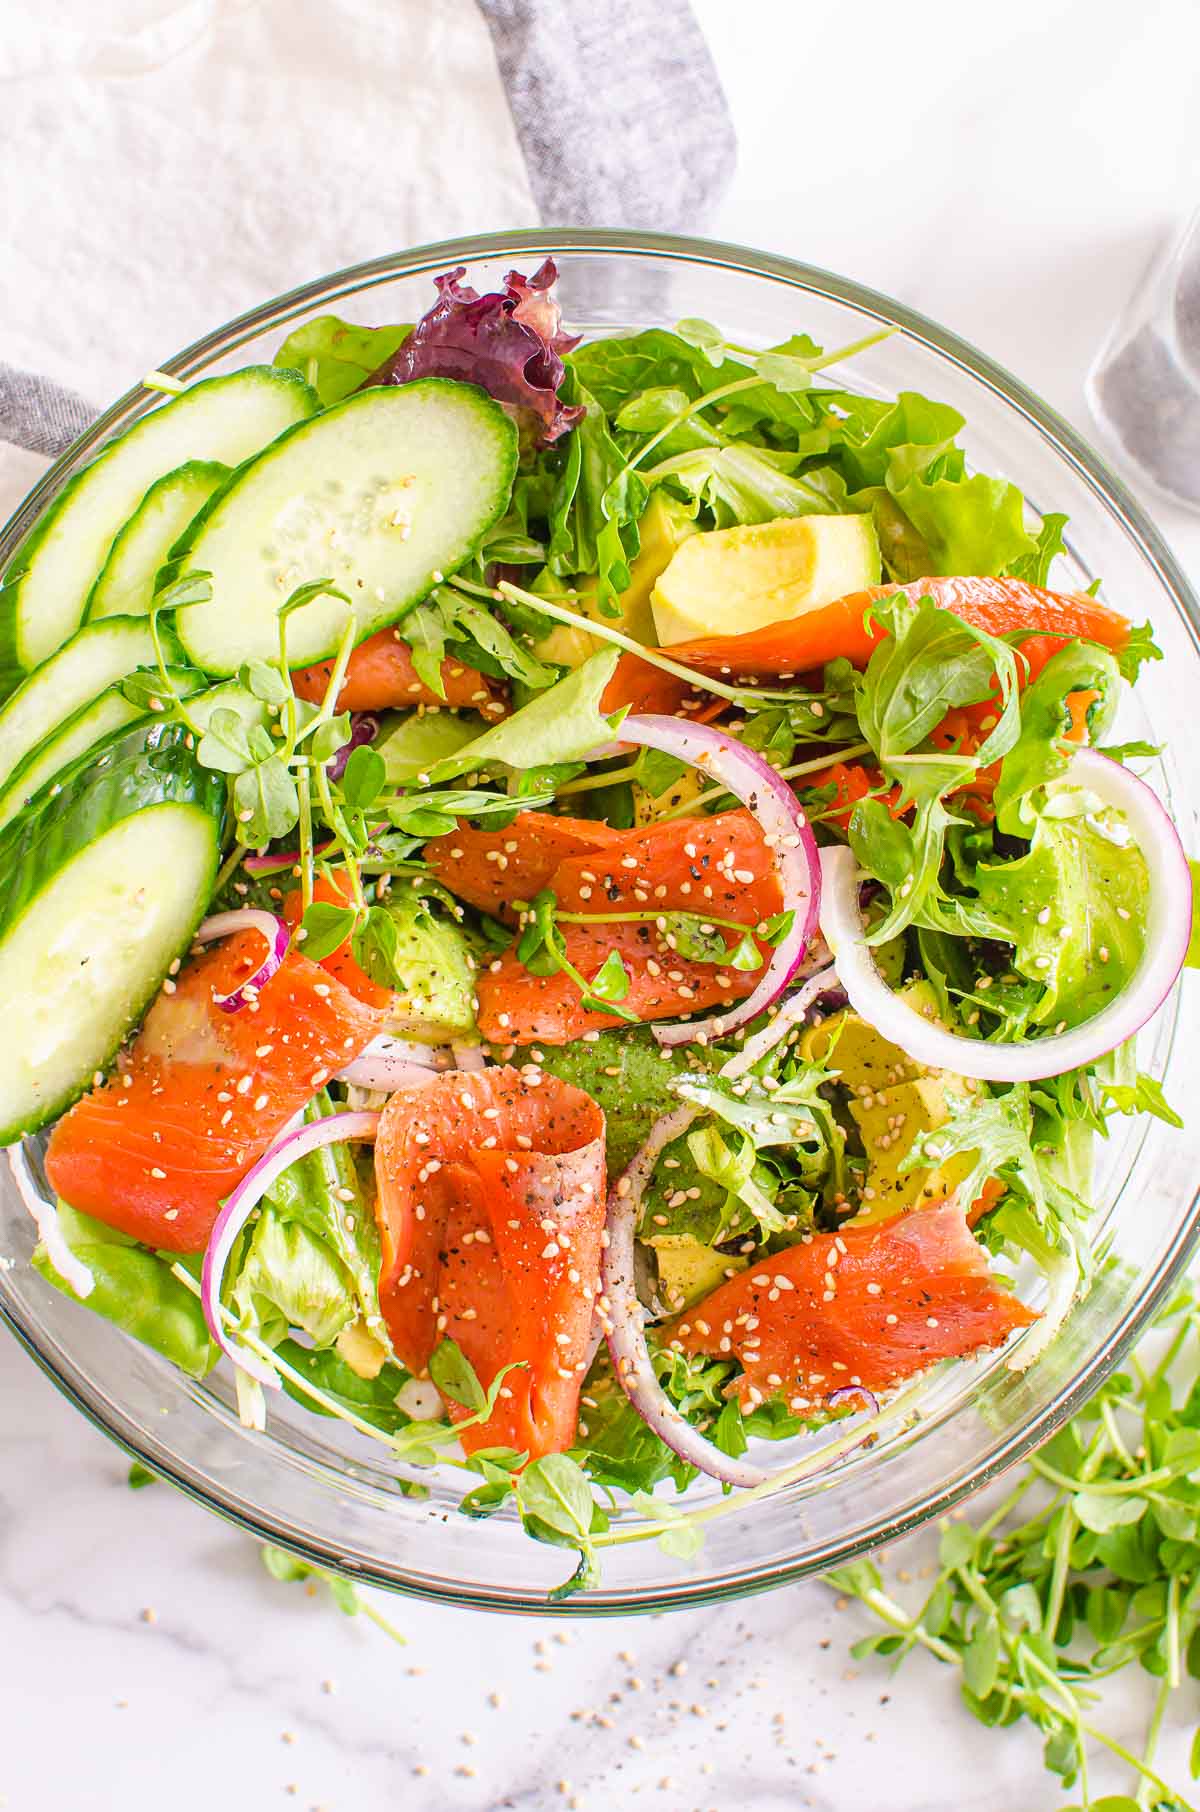 Smoked salmon salad in a bowl garnished with sesame seeds.